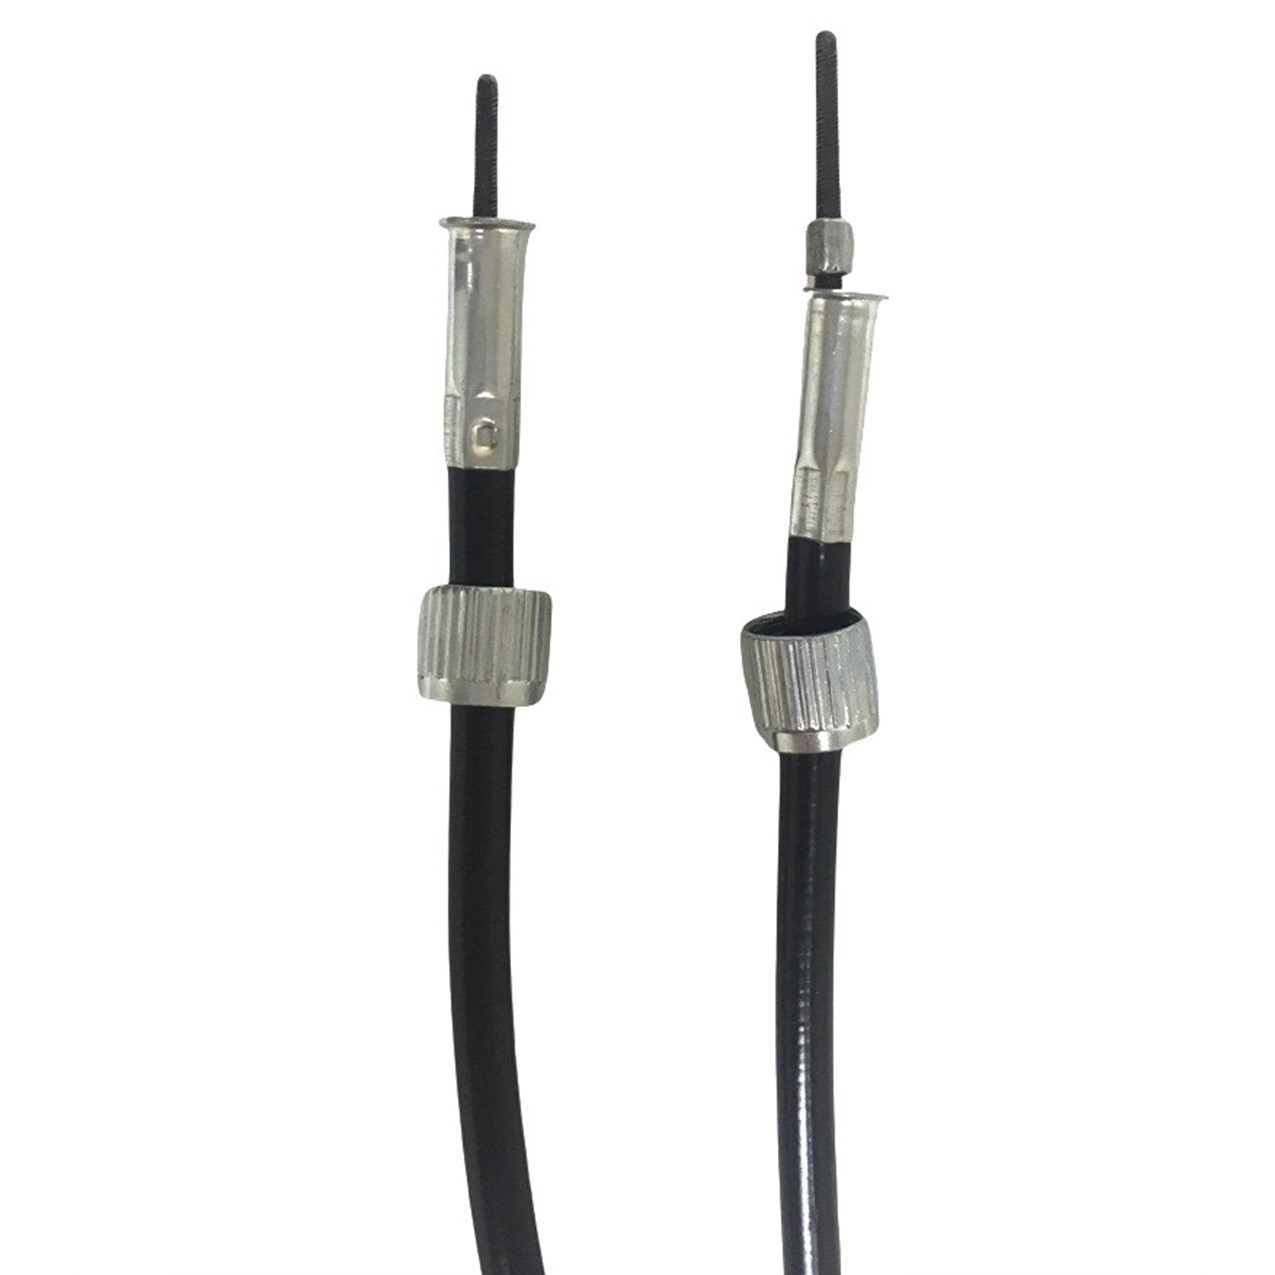 SPEEDOMETER CABLE Fits E-Ton Beamer, Matrix 50-150cc Scooters + Many other brands Out=37.25" / Inner Wire=38.75" Nut ID=11 - Click Image to Close